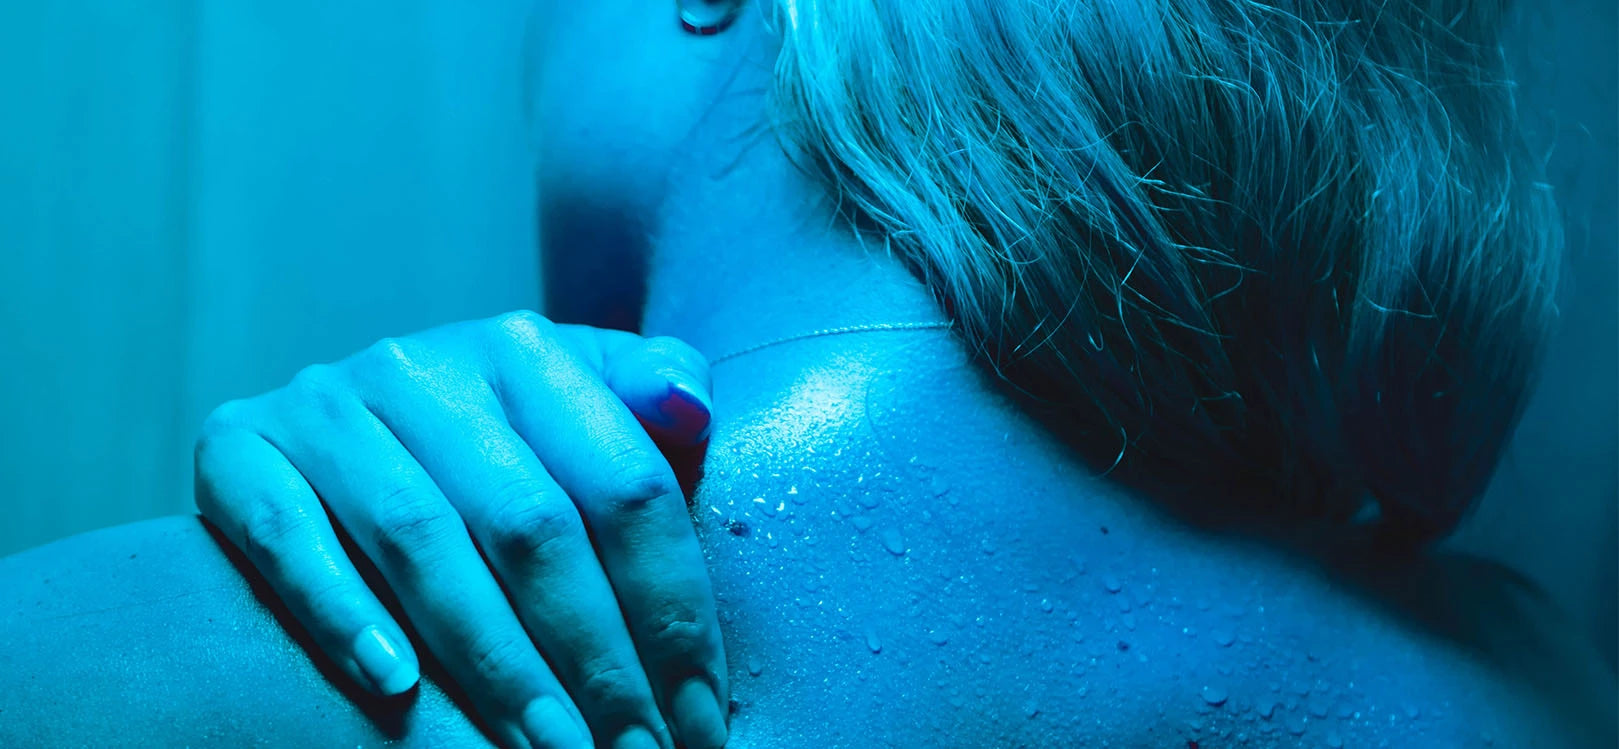 Blue-toned image of woman with blonde hair over her right shoulder holding her left shoulder and lower neck area in pain